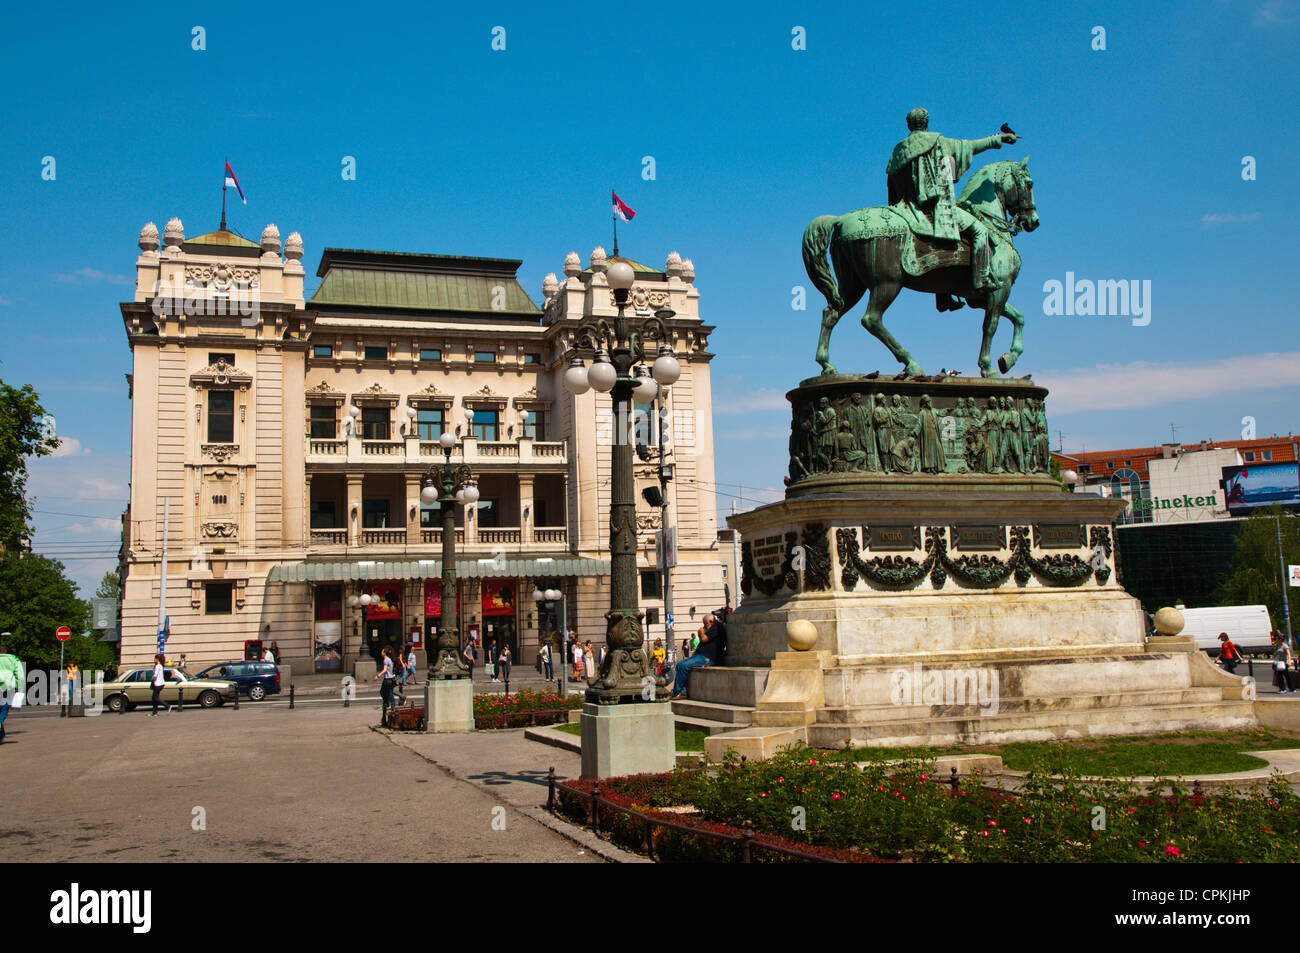 Trg Republike square with National Theatre and statue of Prince Mihailo central Belgrade Serbia Europe Stock Photo